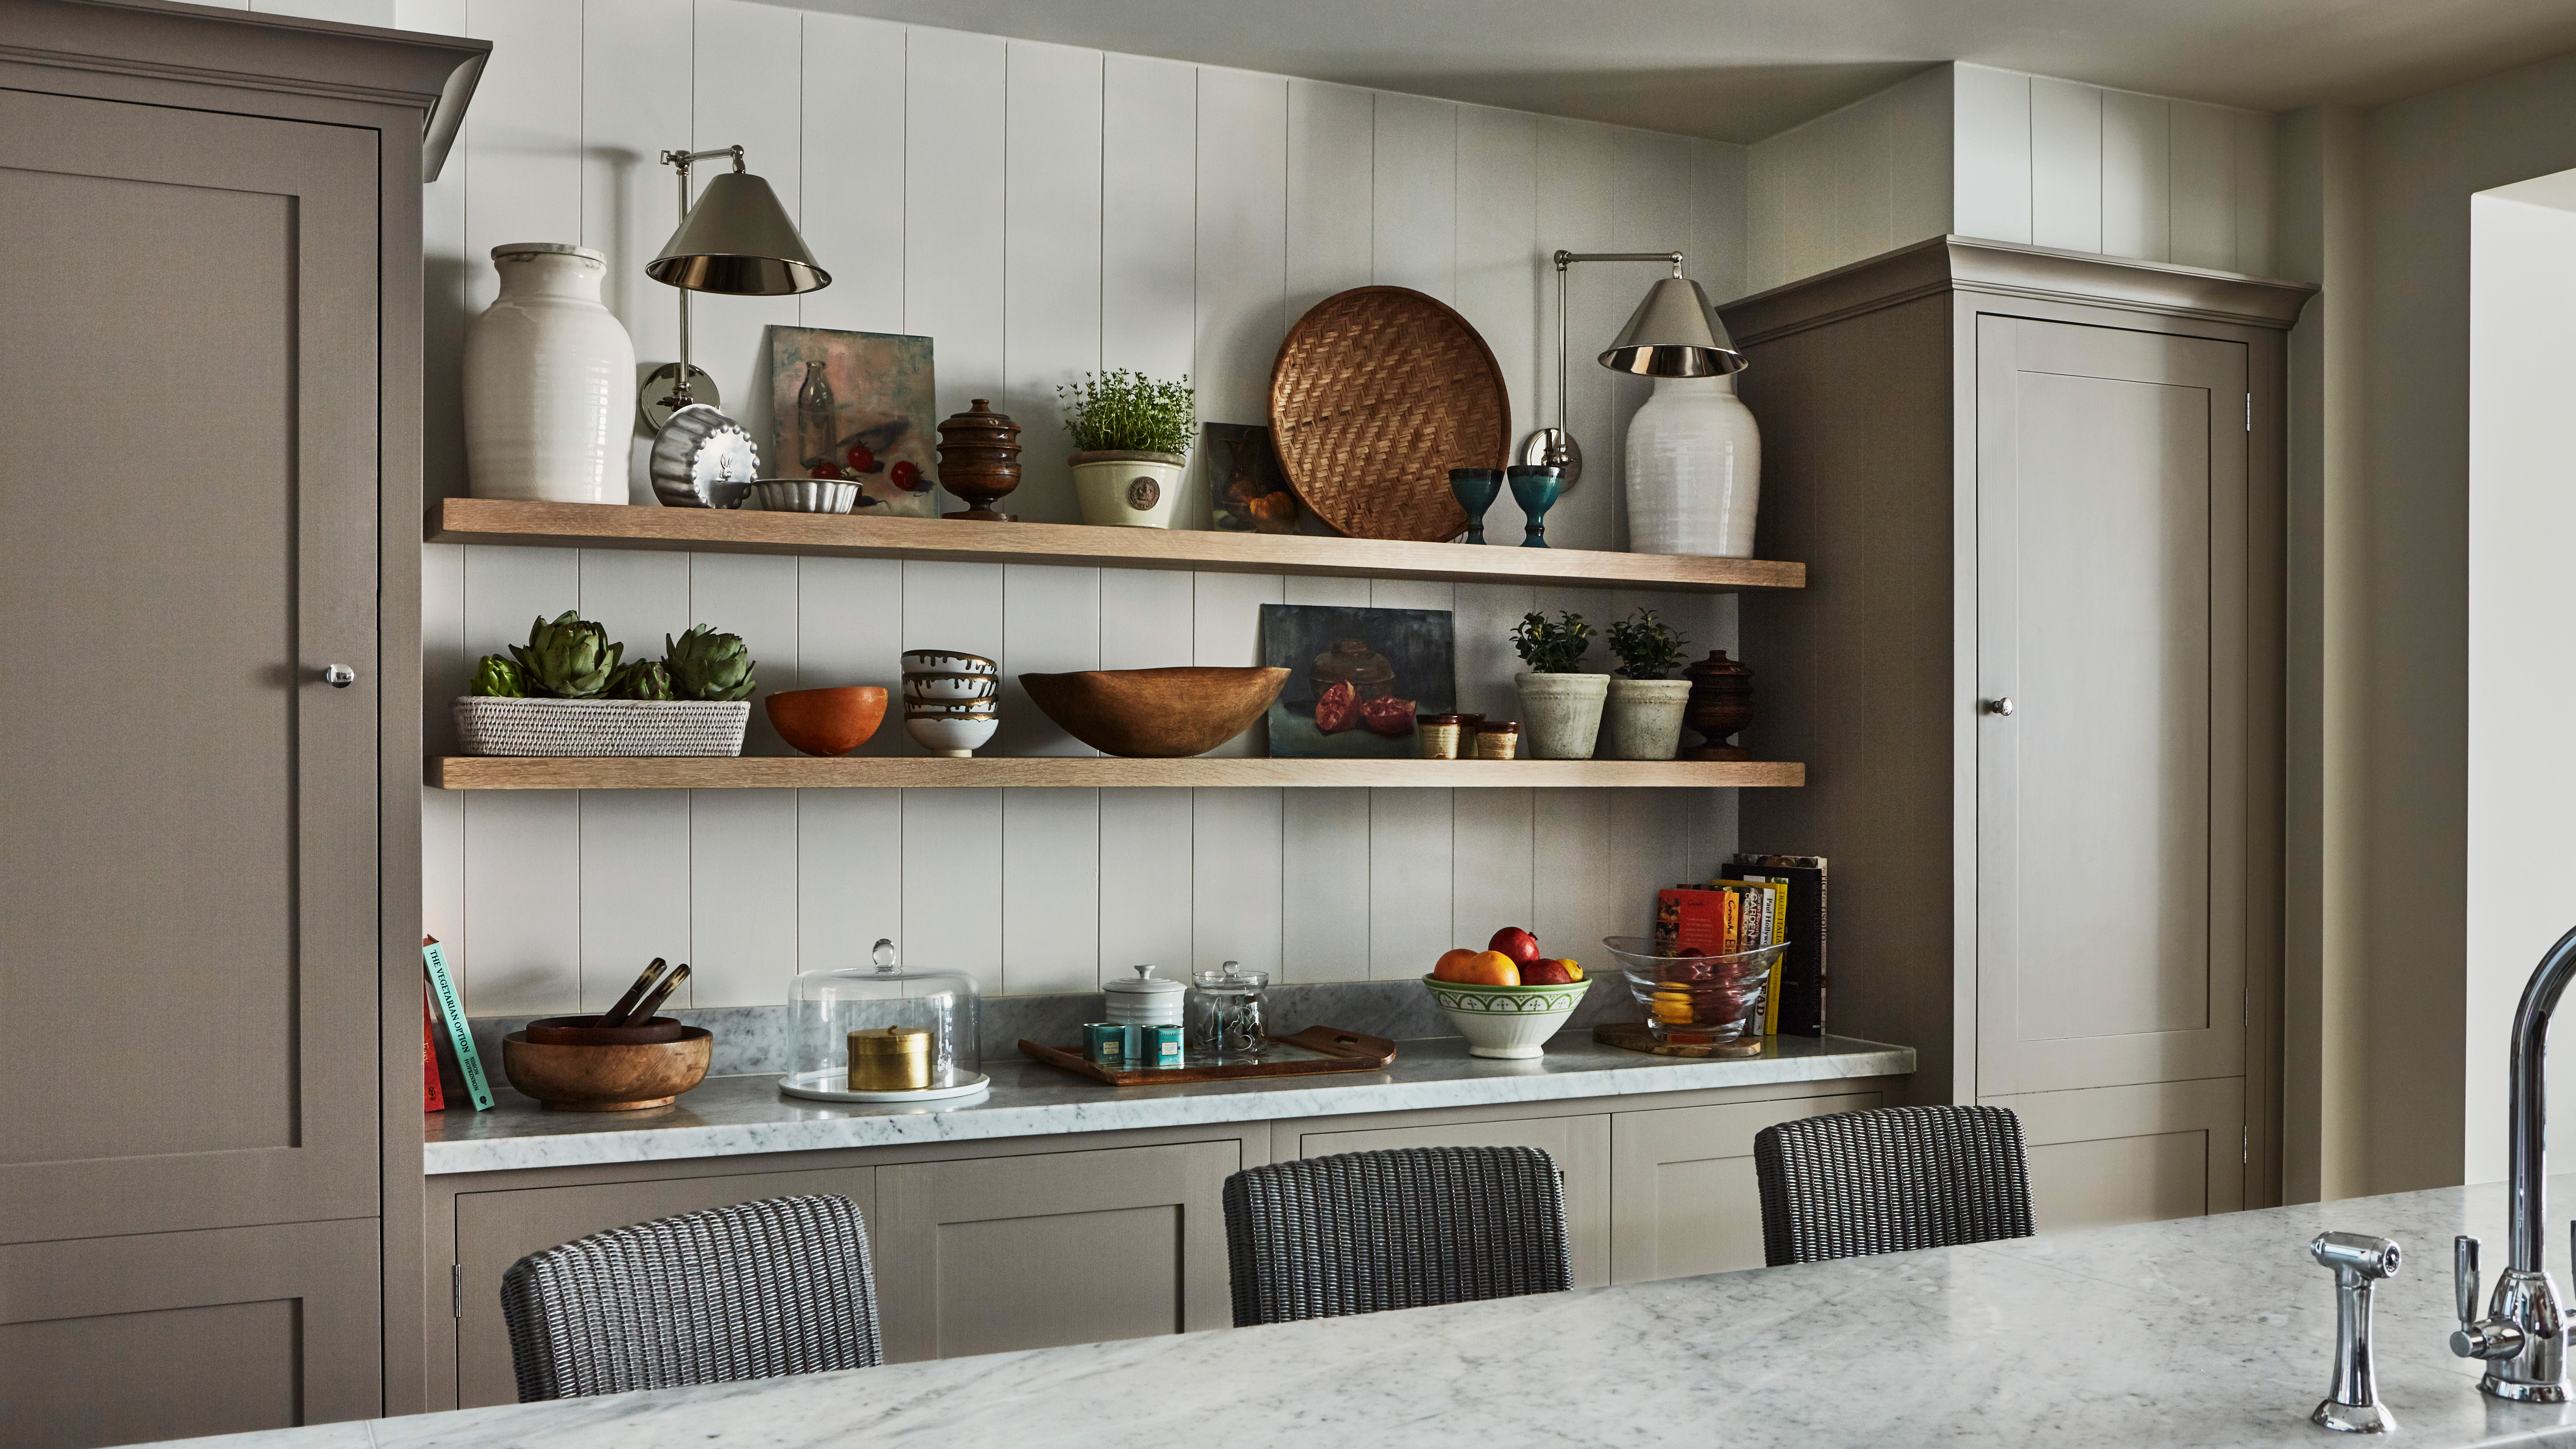 Kitchen Shelving Ideas 14 Ways To, How To Add Shelves Kitchen Cabinets